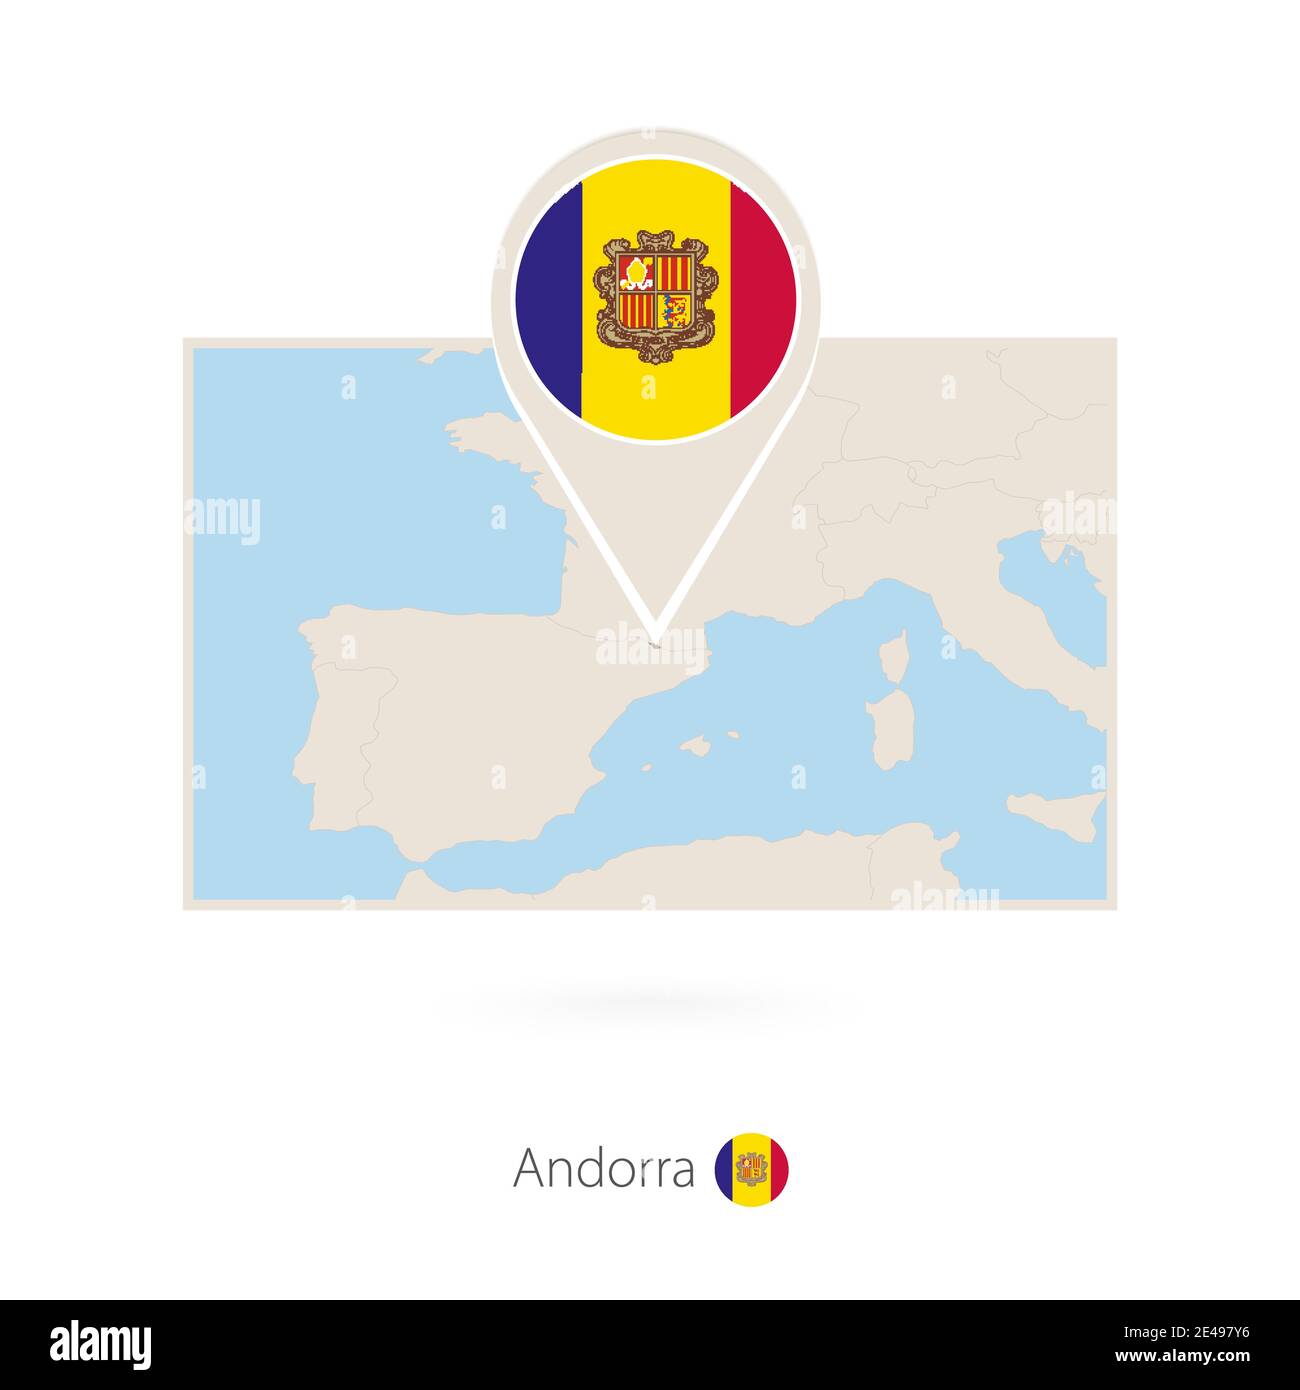 Rectangular map of Andorra with pin icon of Andorra Stock Vector